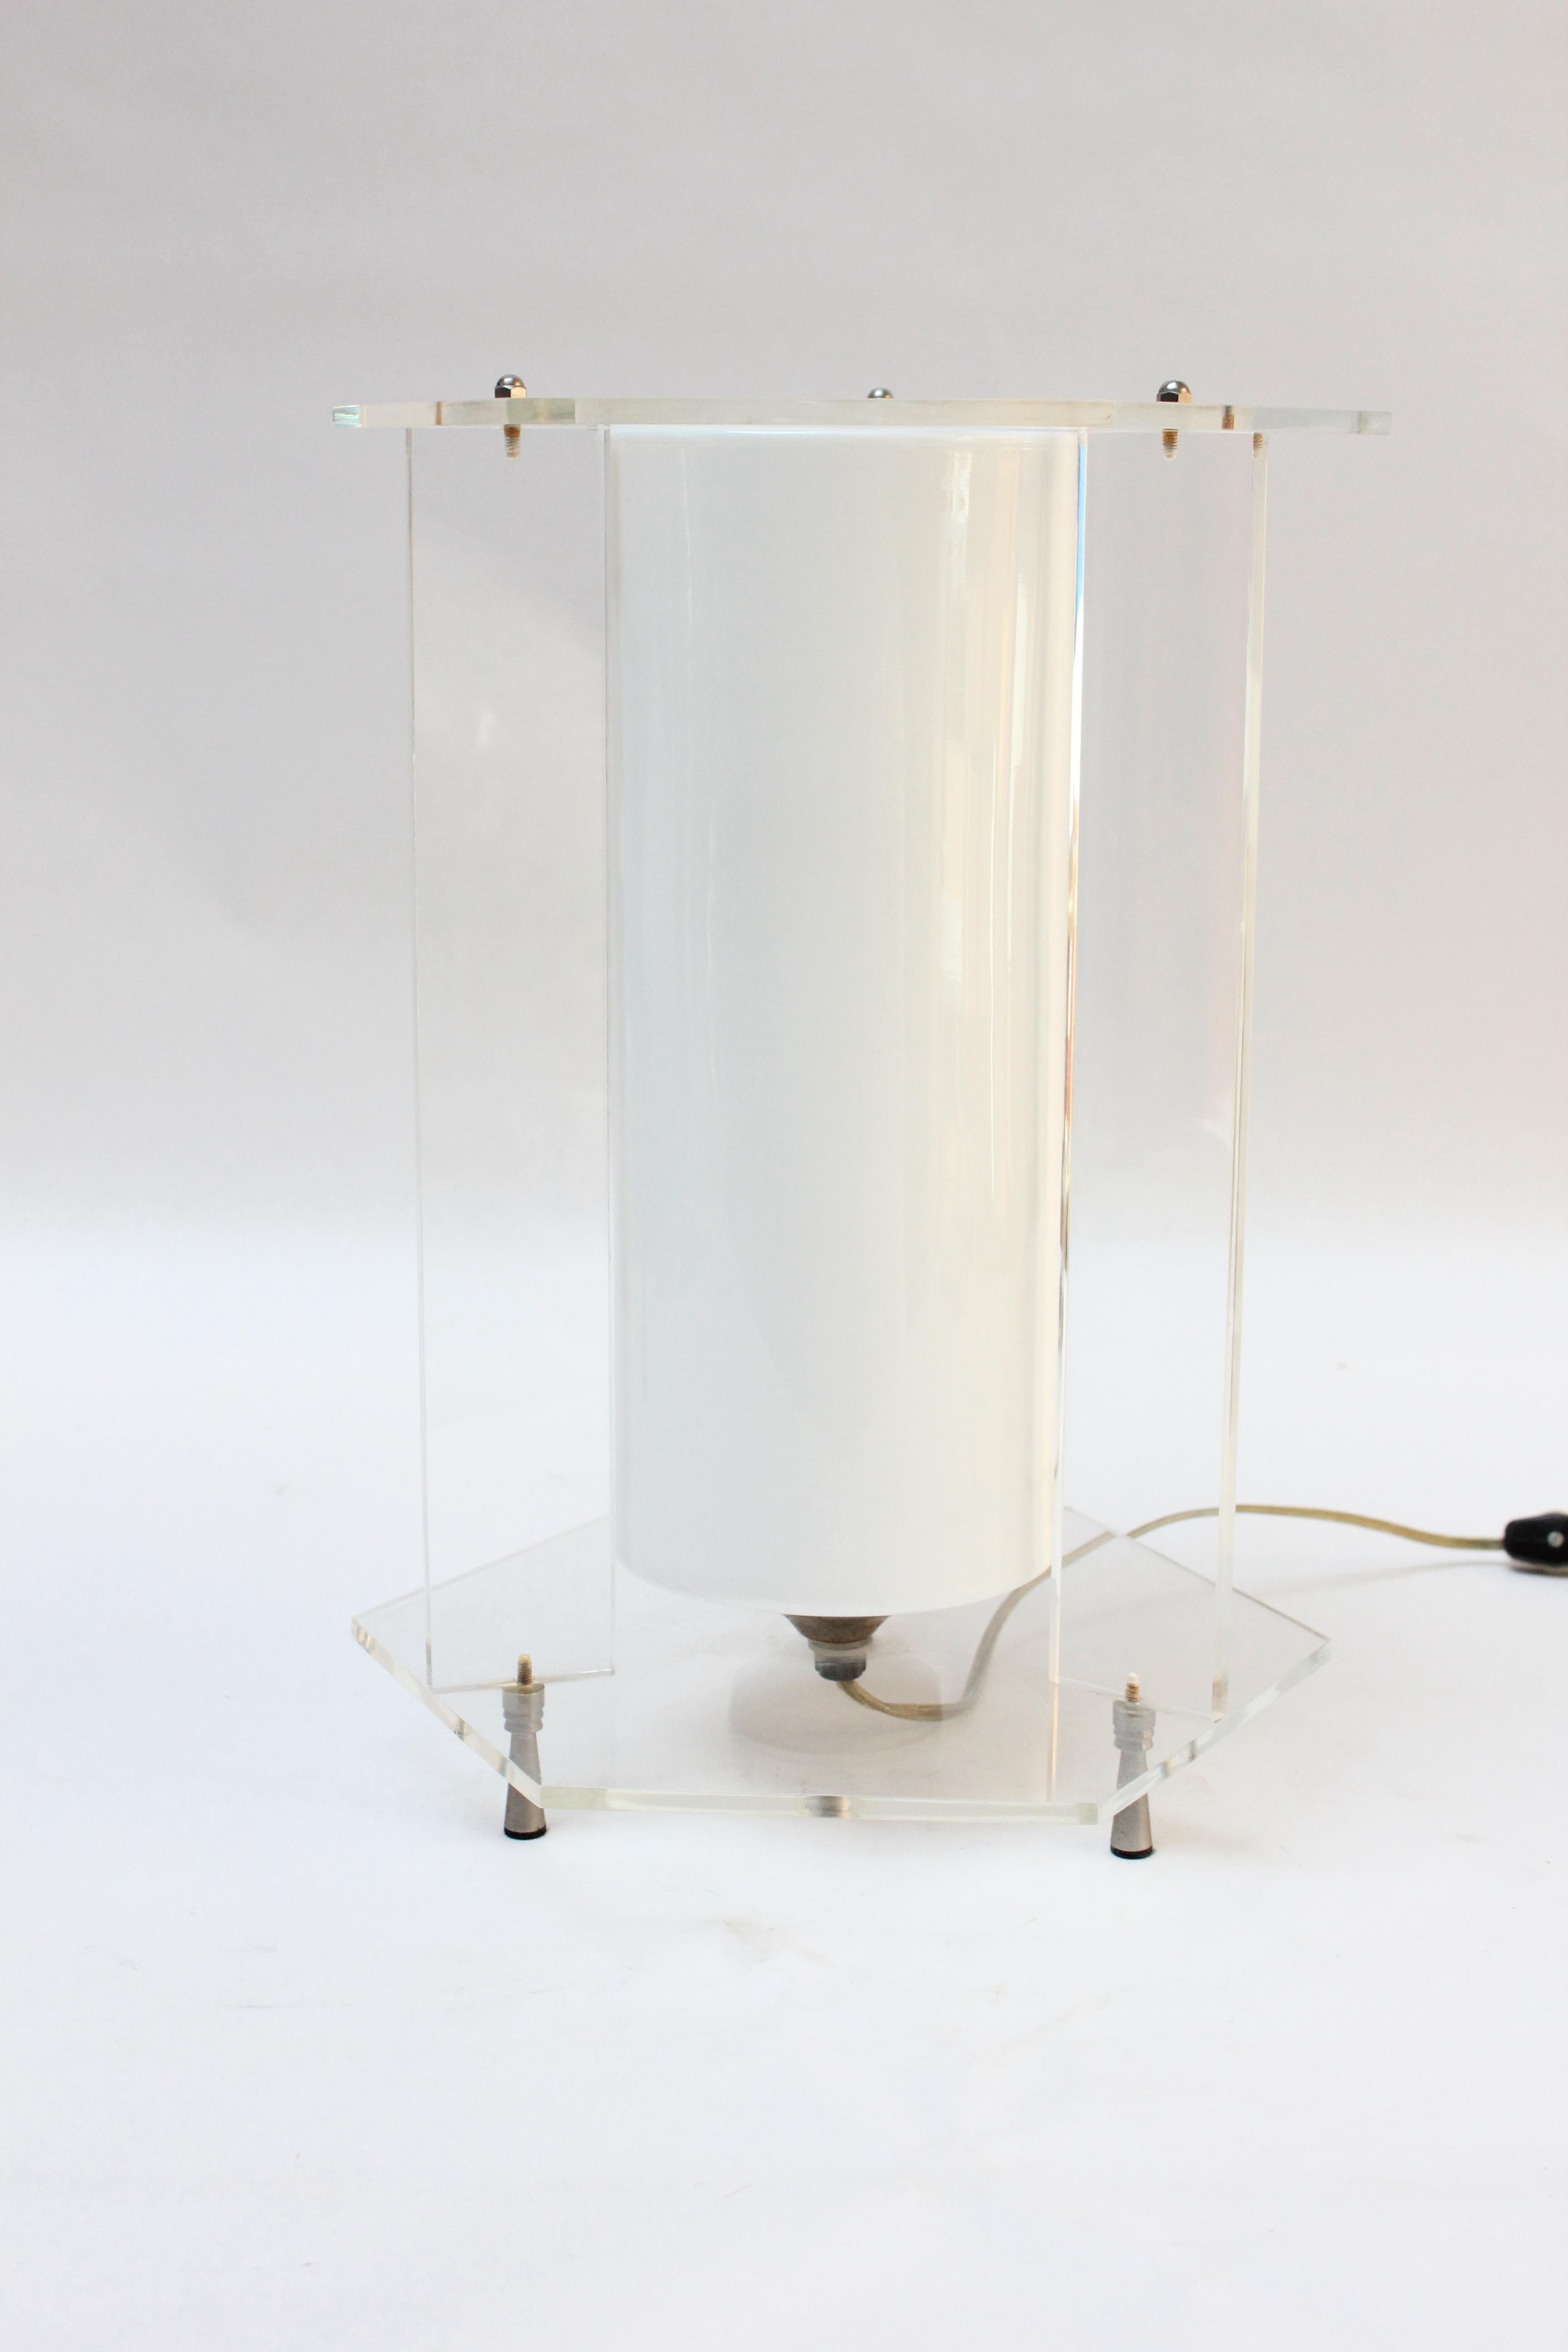 Acrylic hexagonal-form table lamp with a white cased-glass inset cylinder, all supported by three conical metal feet (ca. USA, 1970s).
Very fine, vintage condition with only light scuffs to the bottom acrylic tier and metal components.
Height: 15.25